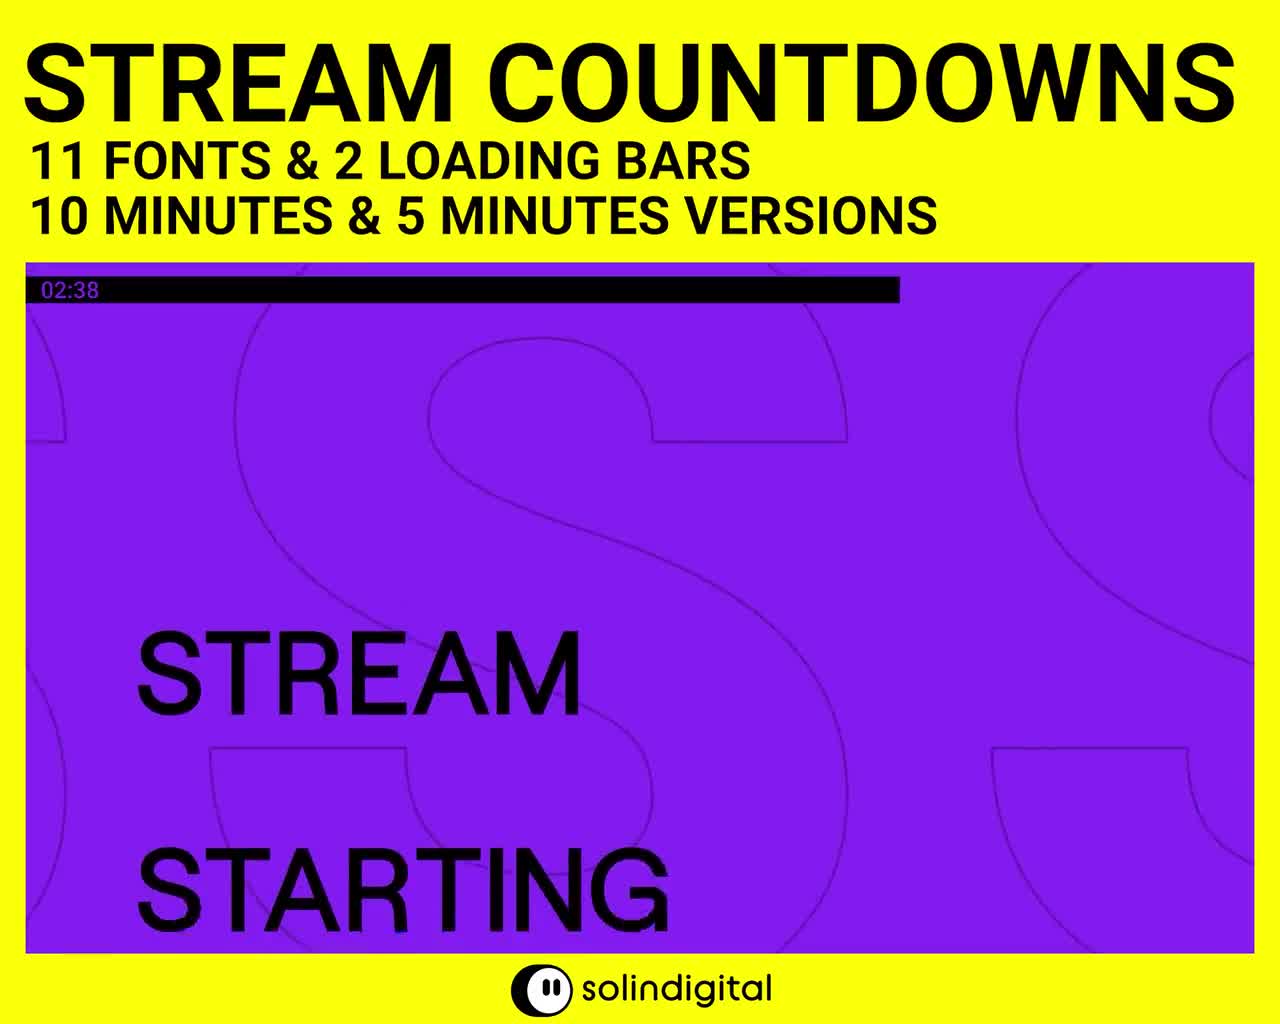 How to Start Live Streaming Games in 2 Minutes! 